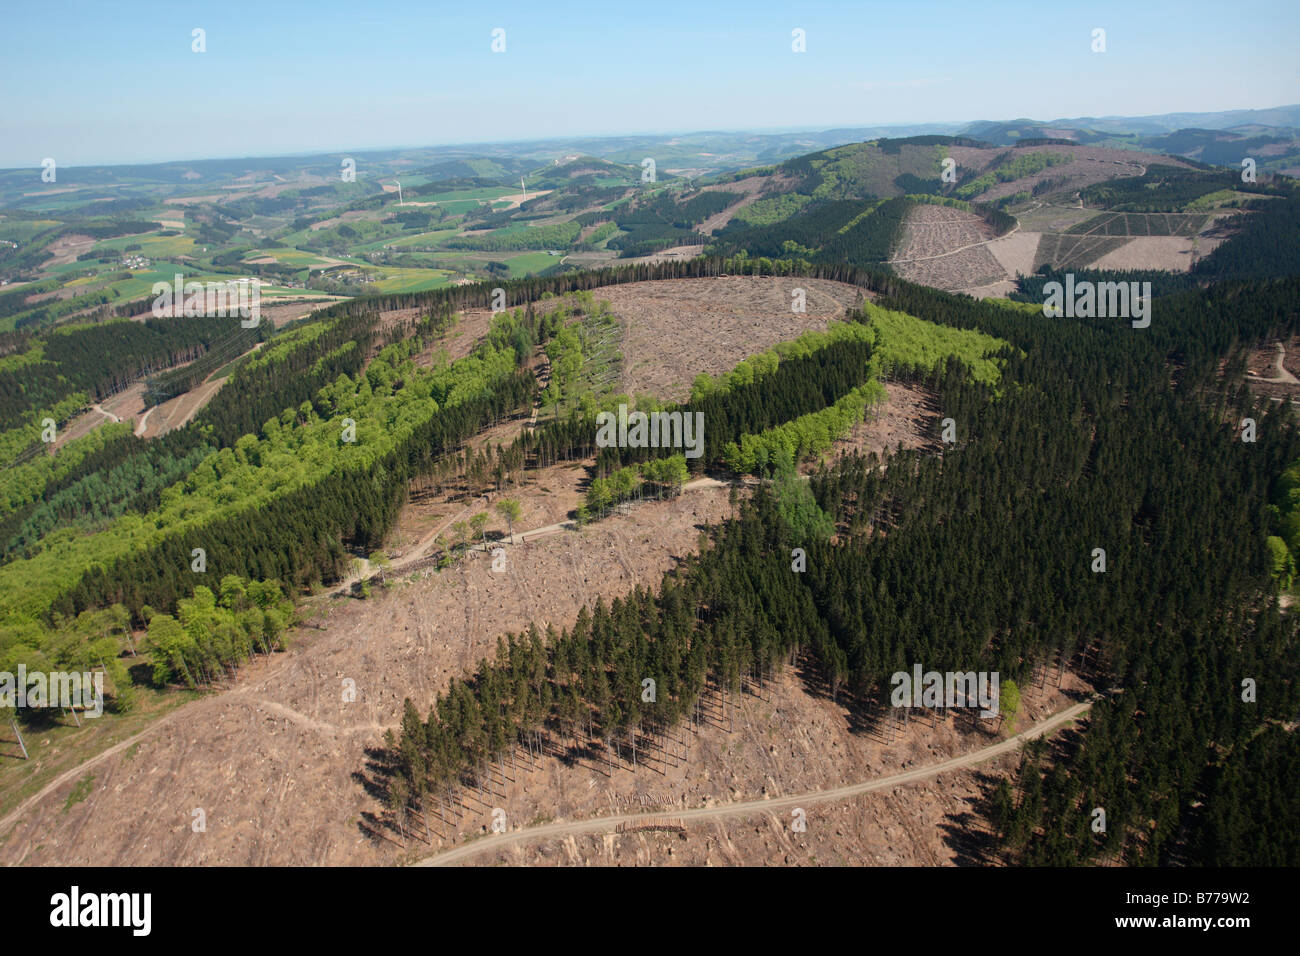 Aerial photograph, damage from the Krill storm in Mosebolle, Meschede Eversberg, Sauerland, North Rhine-Westphalia, Germany, Eu Stock Photo